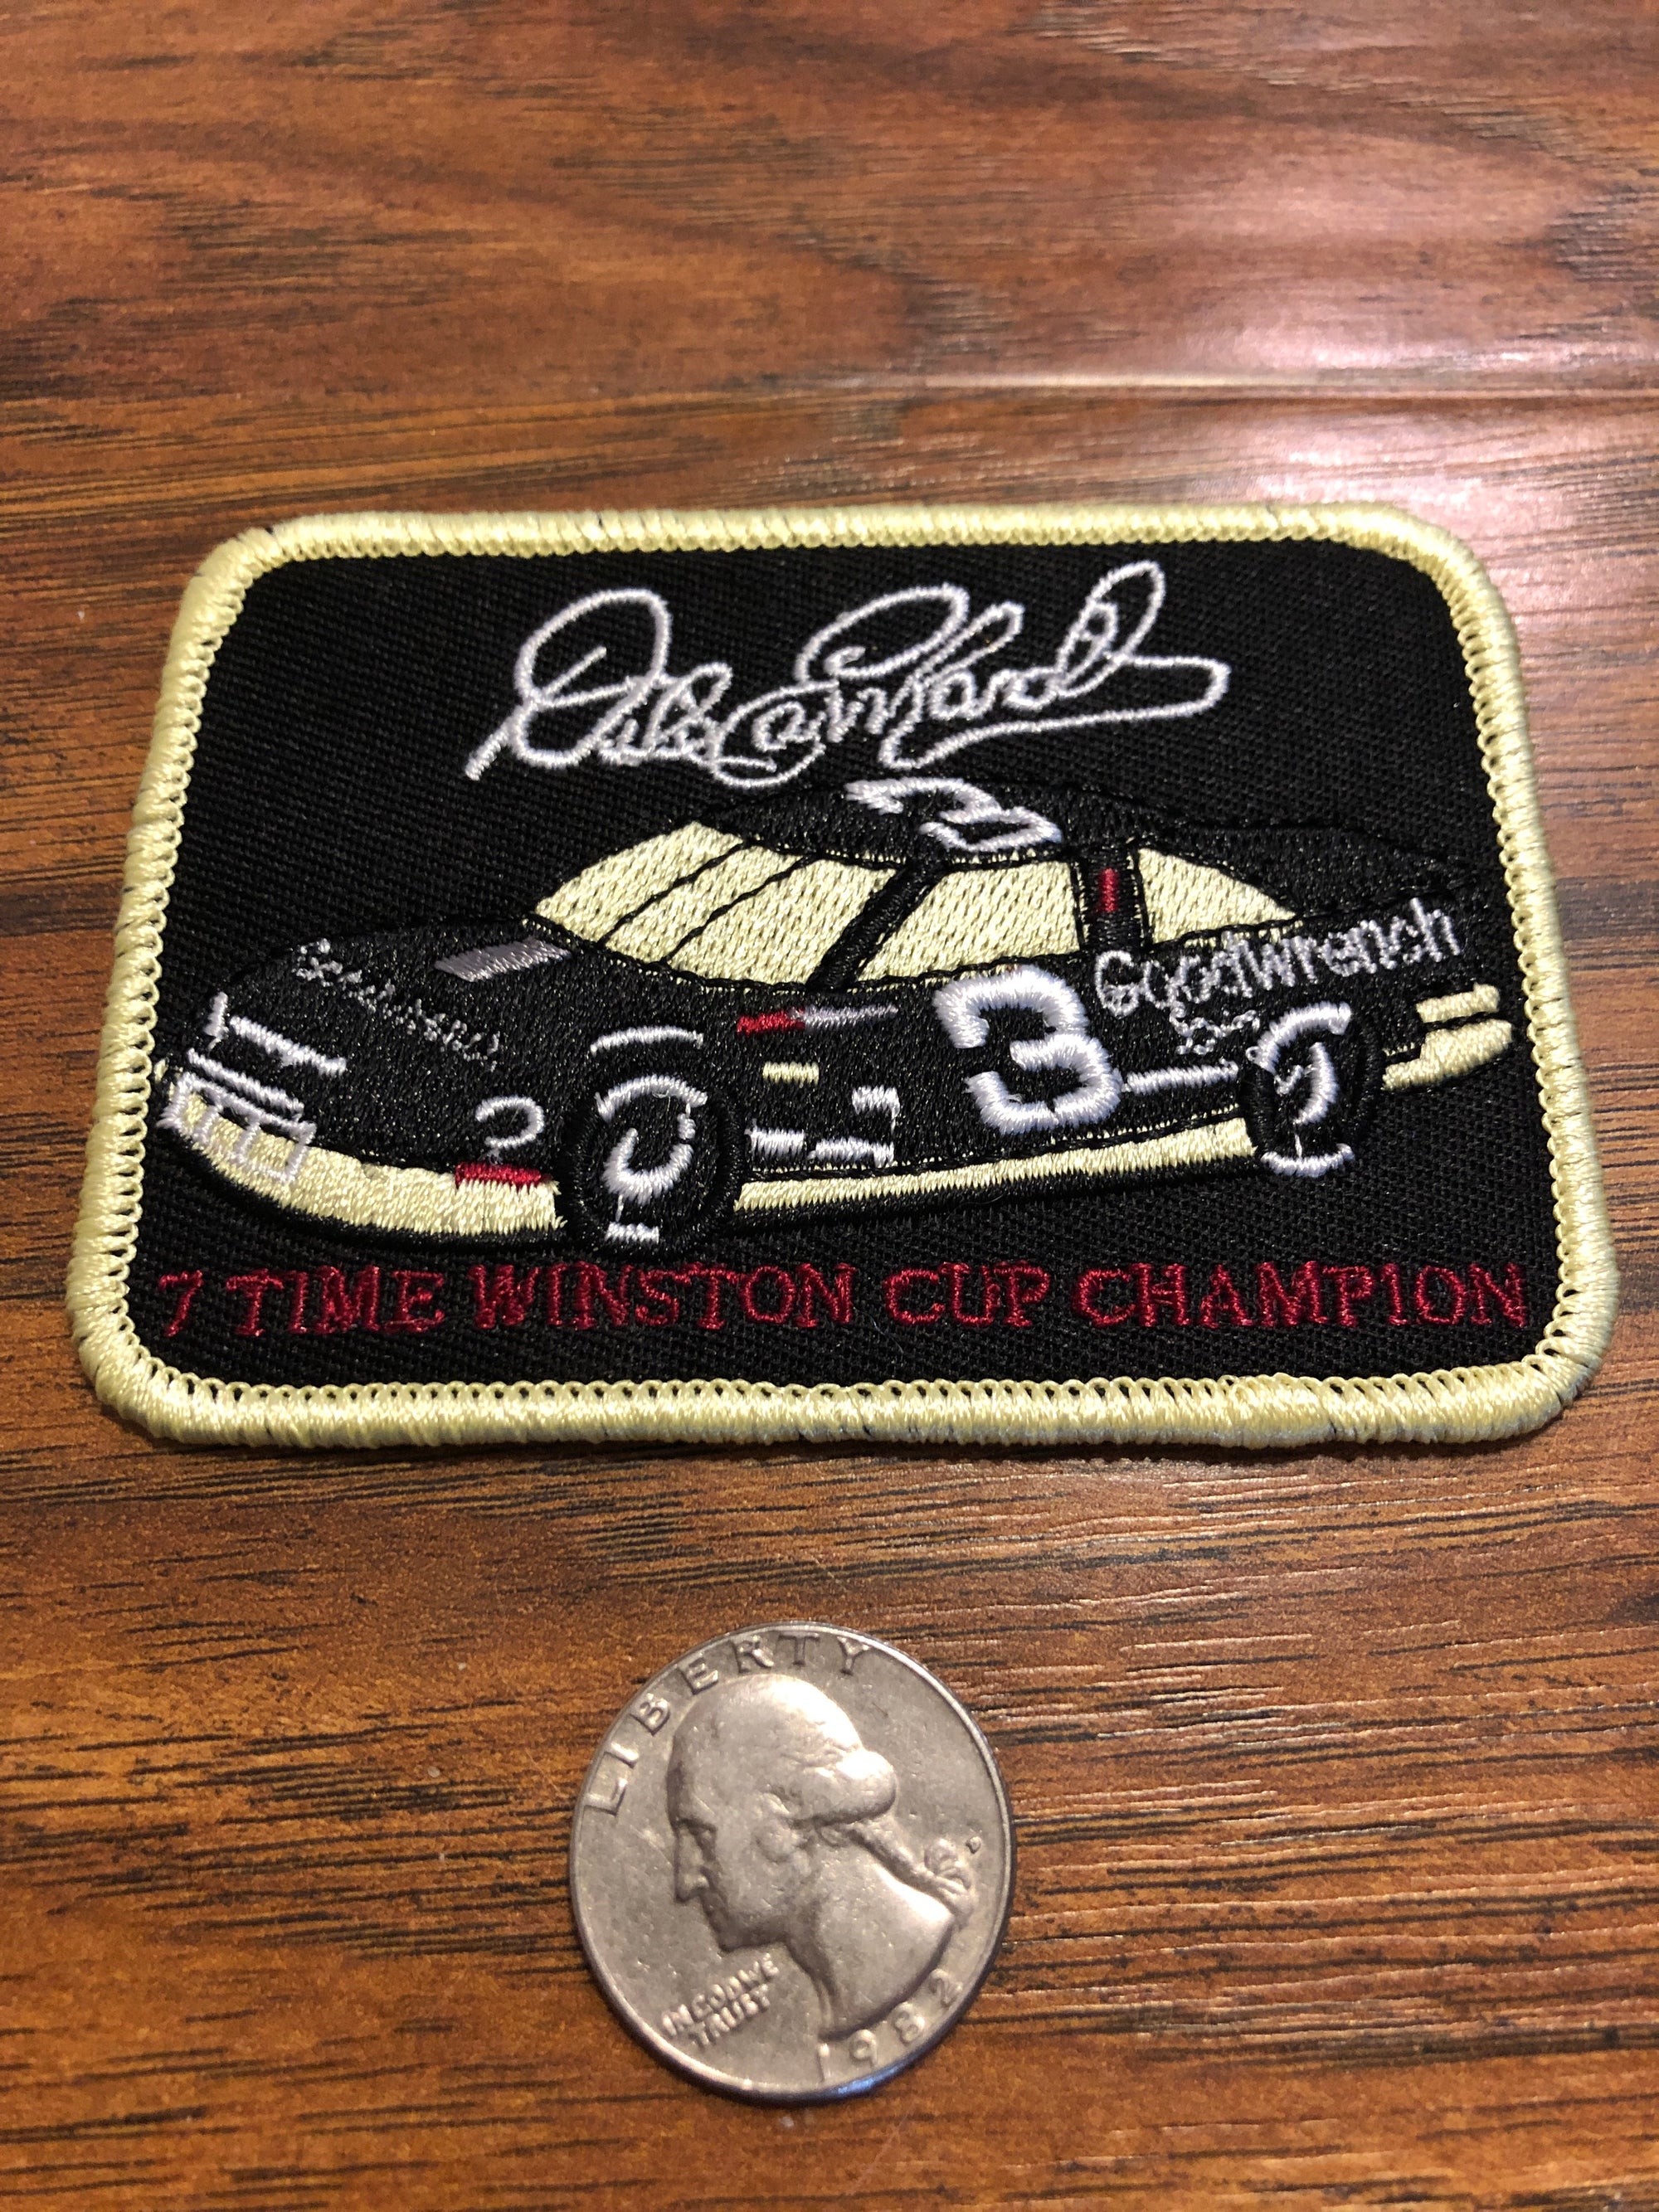 Dale Earnhardt 7 Time Winston Cup Champion